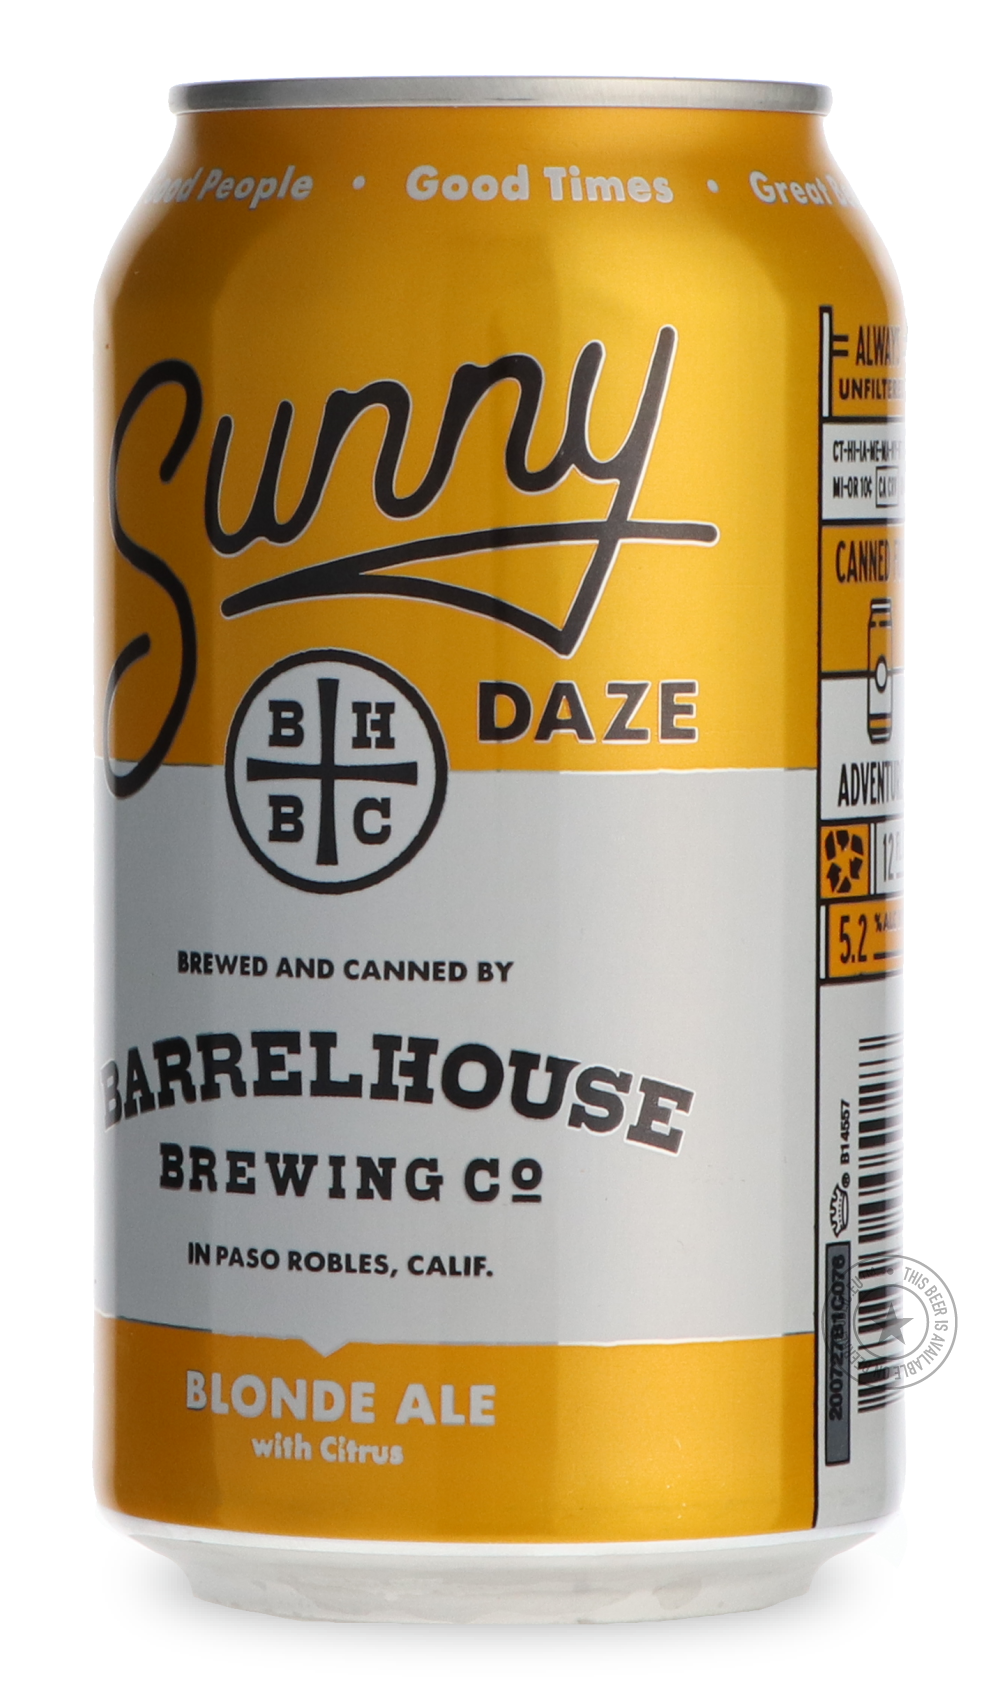 -BarrelHouse- Sunny Daze-Pale- Only @ Beer Republic - The best online beer store for American & Canadian craft beer - Buy beer online from the USA and Canada - Bier online kopen - Amerikaans bier kopen - Craft beer store - Craft beer kopen - Amerikanisch bier kaufen - Bier online kaufen - Acheter biere online - IPA - Stout - Porter - New England IPA - Hazy IPA - Imperial Stout - Barrel Aged - Barrel Aged Imperial Stout - Brown - Dark beer - Blond - Blonde - Pilsner - Lager - Wheat - Weizen - Amber - Barley 